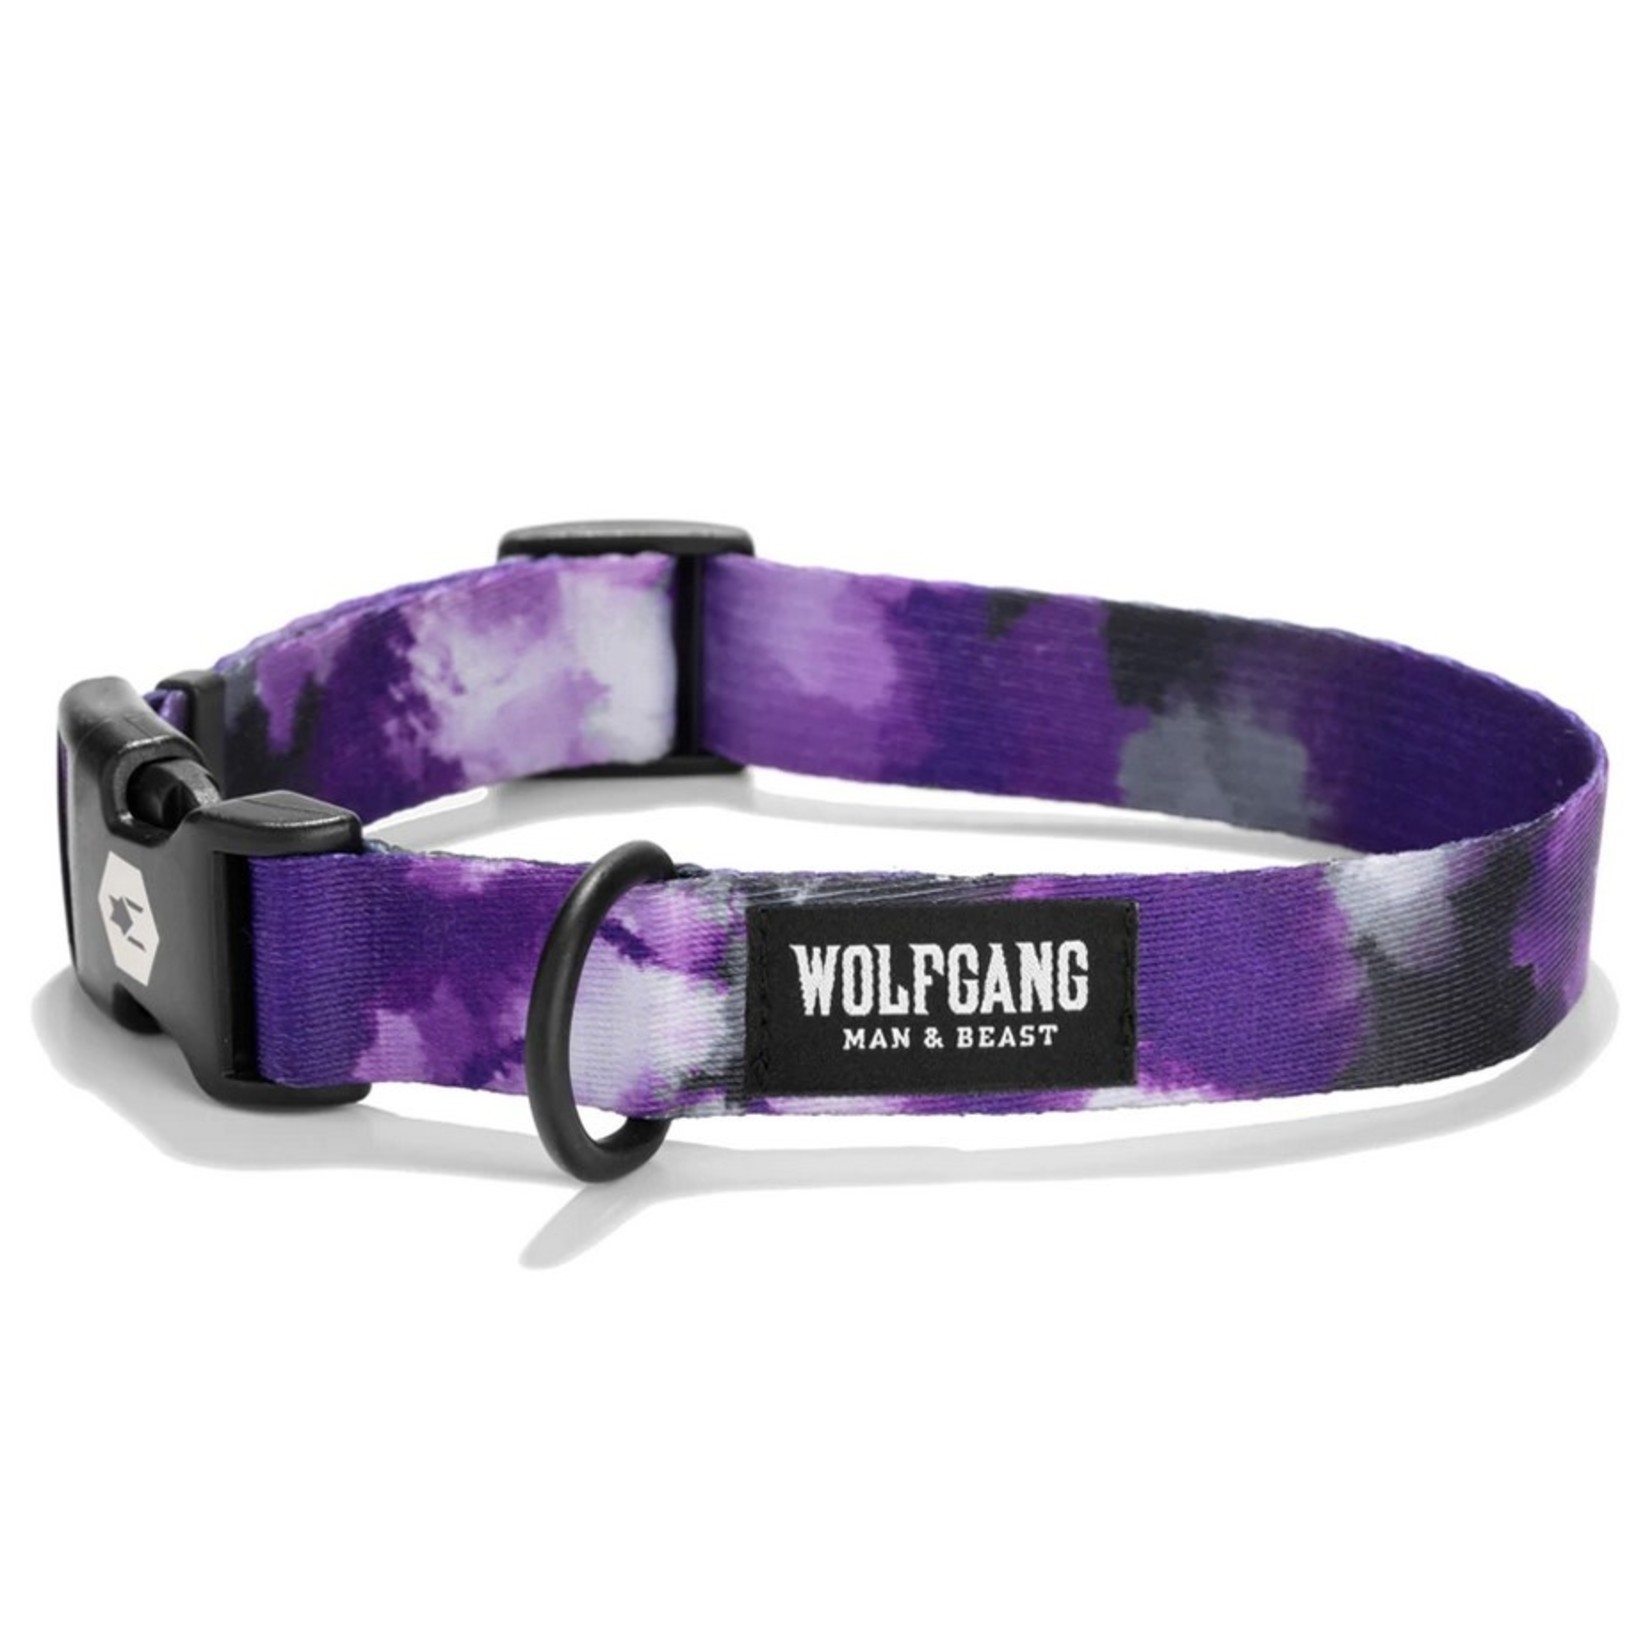 WOLFGANG TieDye Dog Collar *Discontinued* - FINAL SALE - NO REFUNDS OR EXCHANGES